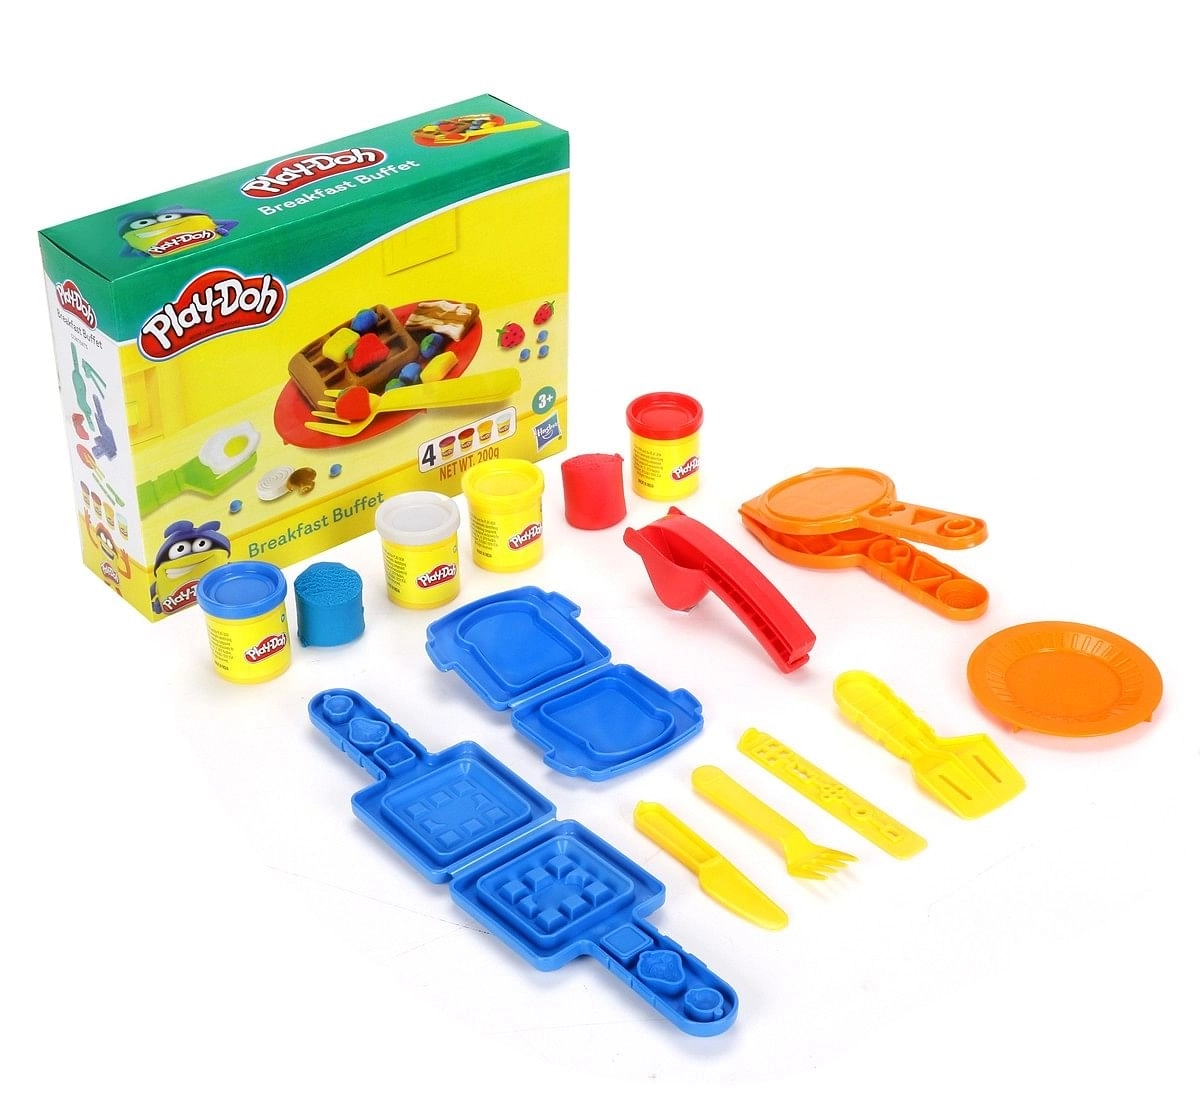 Play Doh Breakfast Buffet Playset with 4 Dough Colors for Kids Multicolor 3Y+